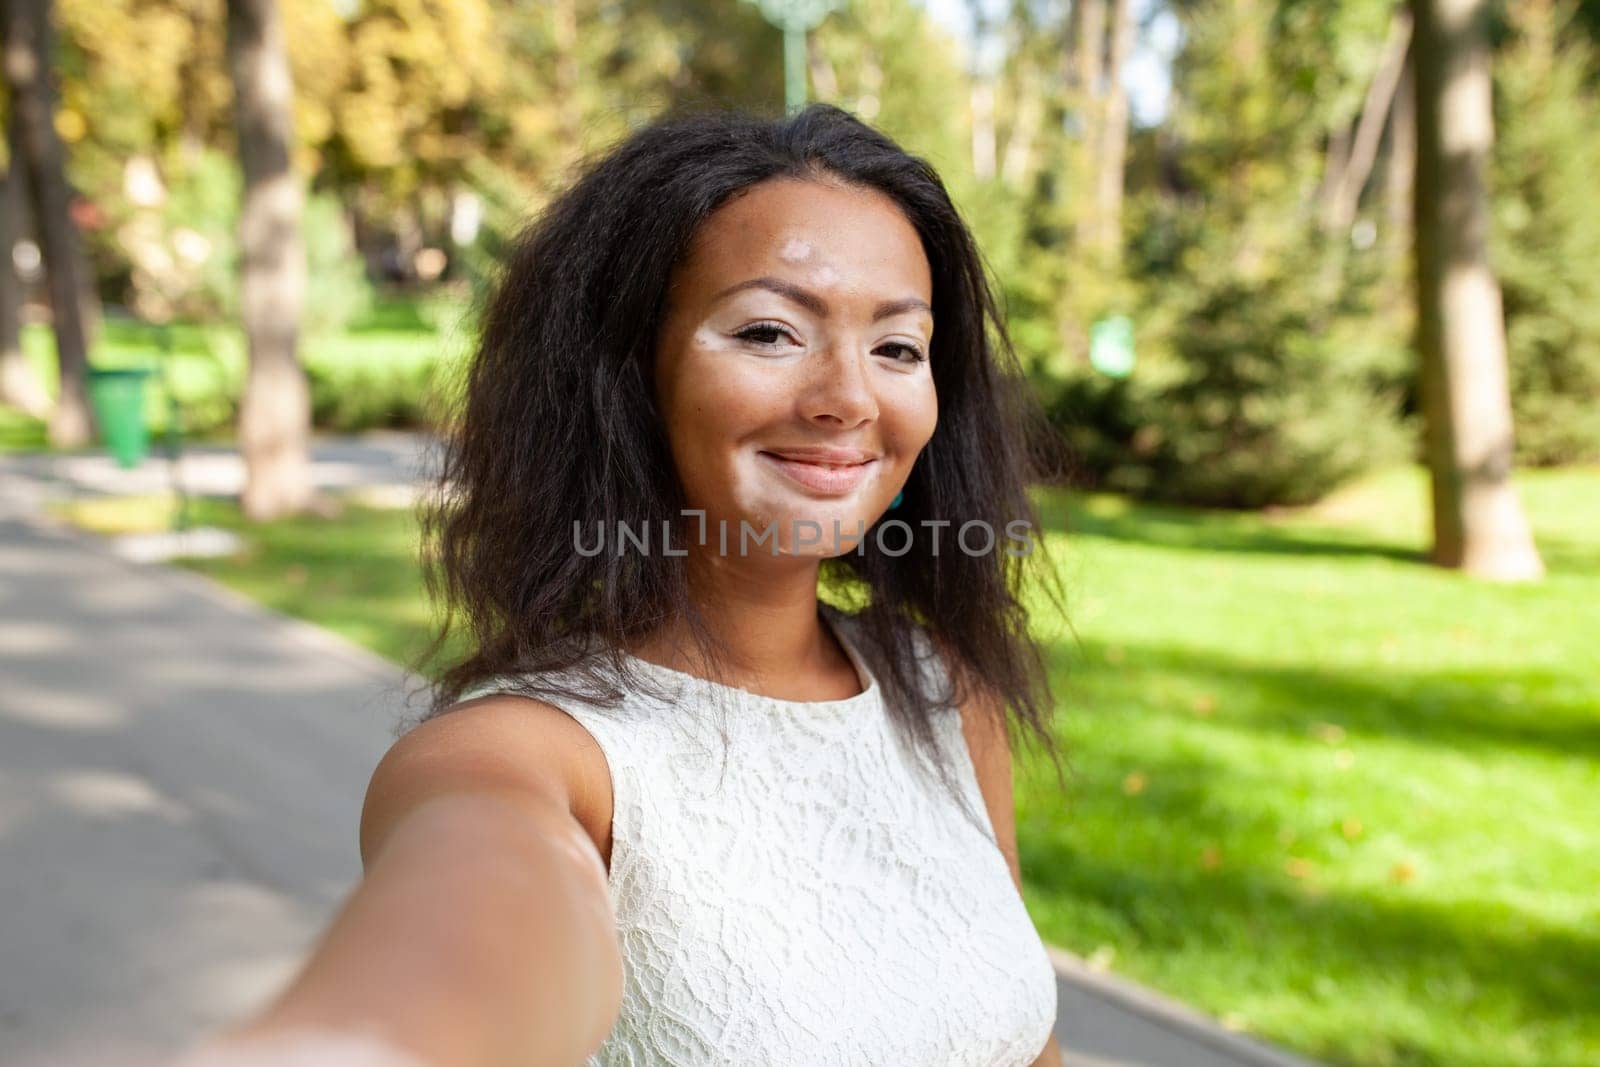 Smiling woman with vitiligo disease taking selfie in park during weekend by andreonegin